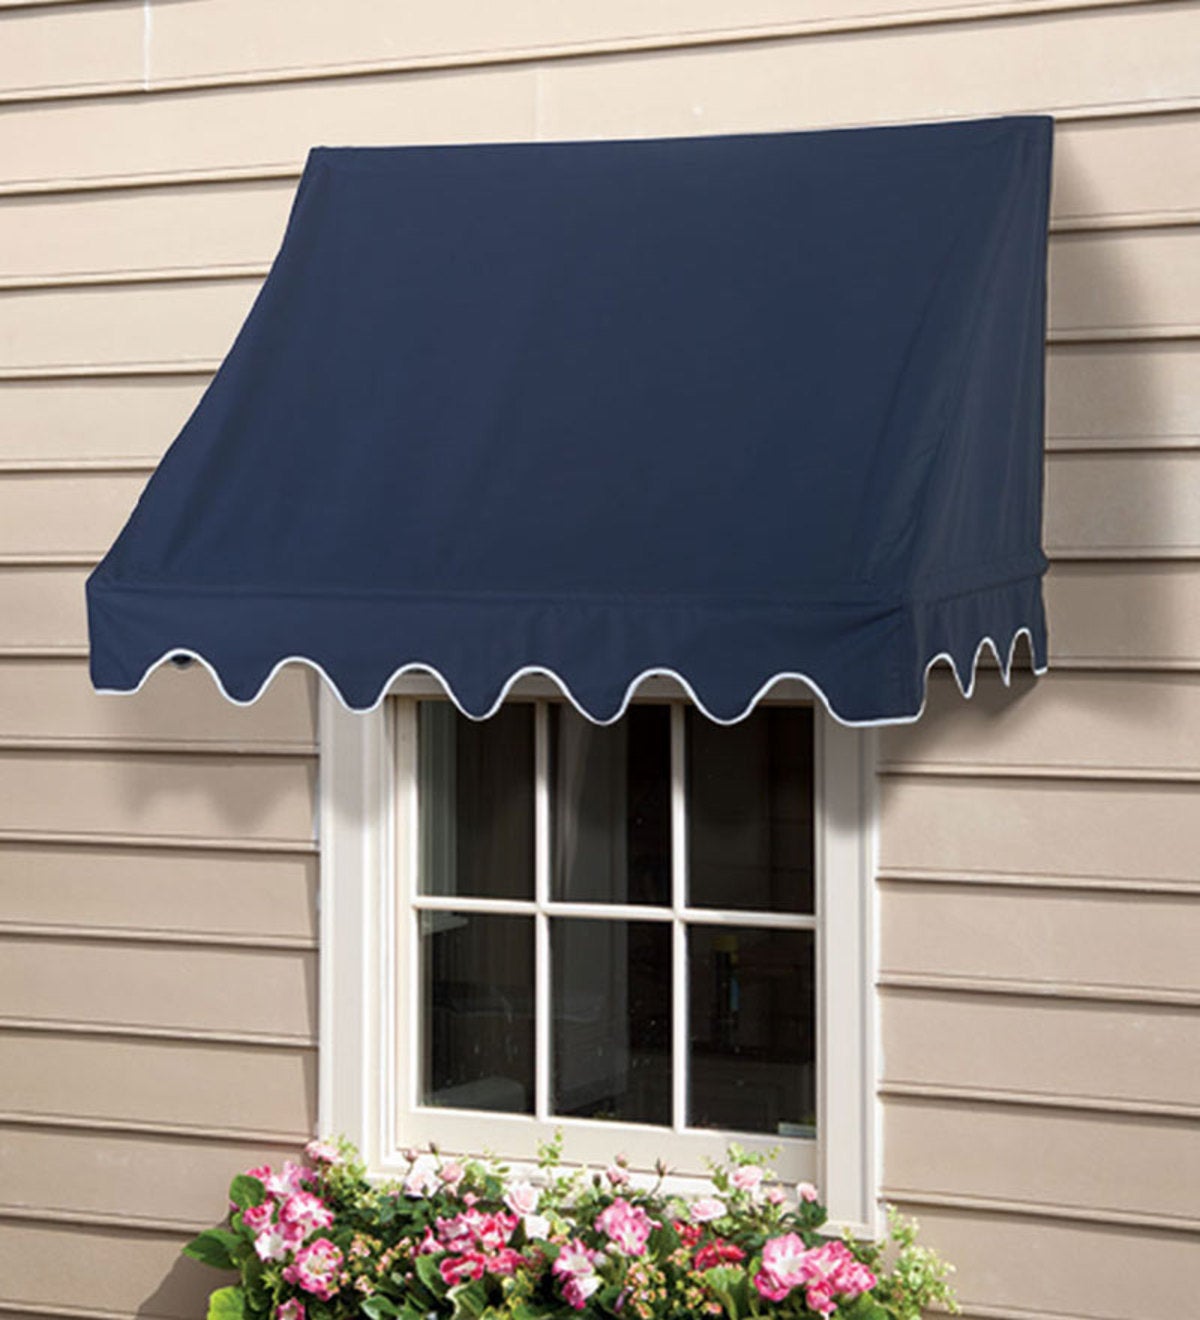 4' Scalloped Edge Window And Door Awning - Green